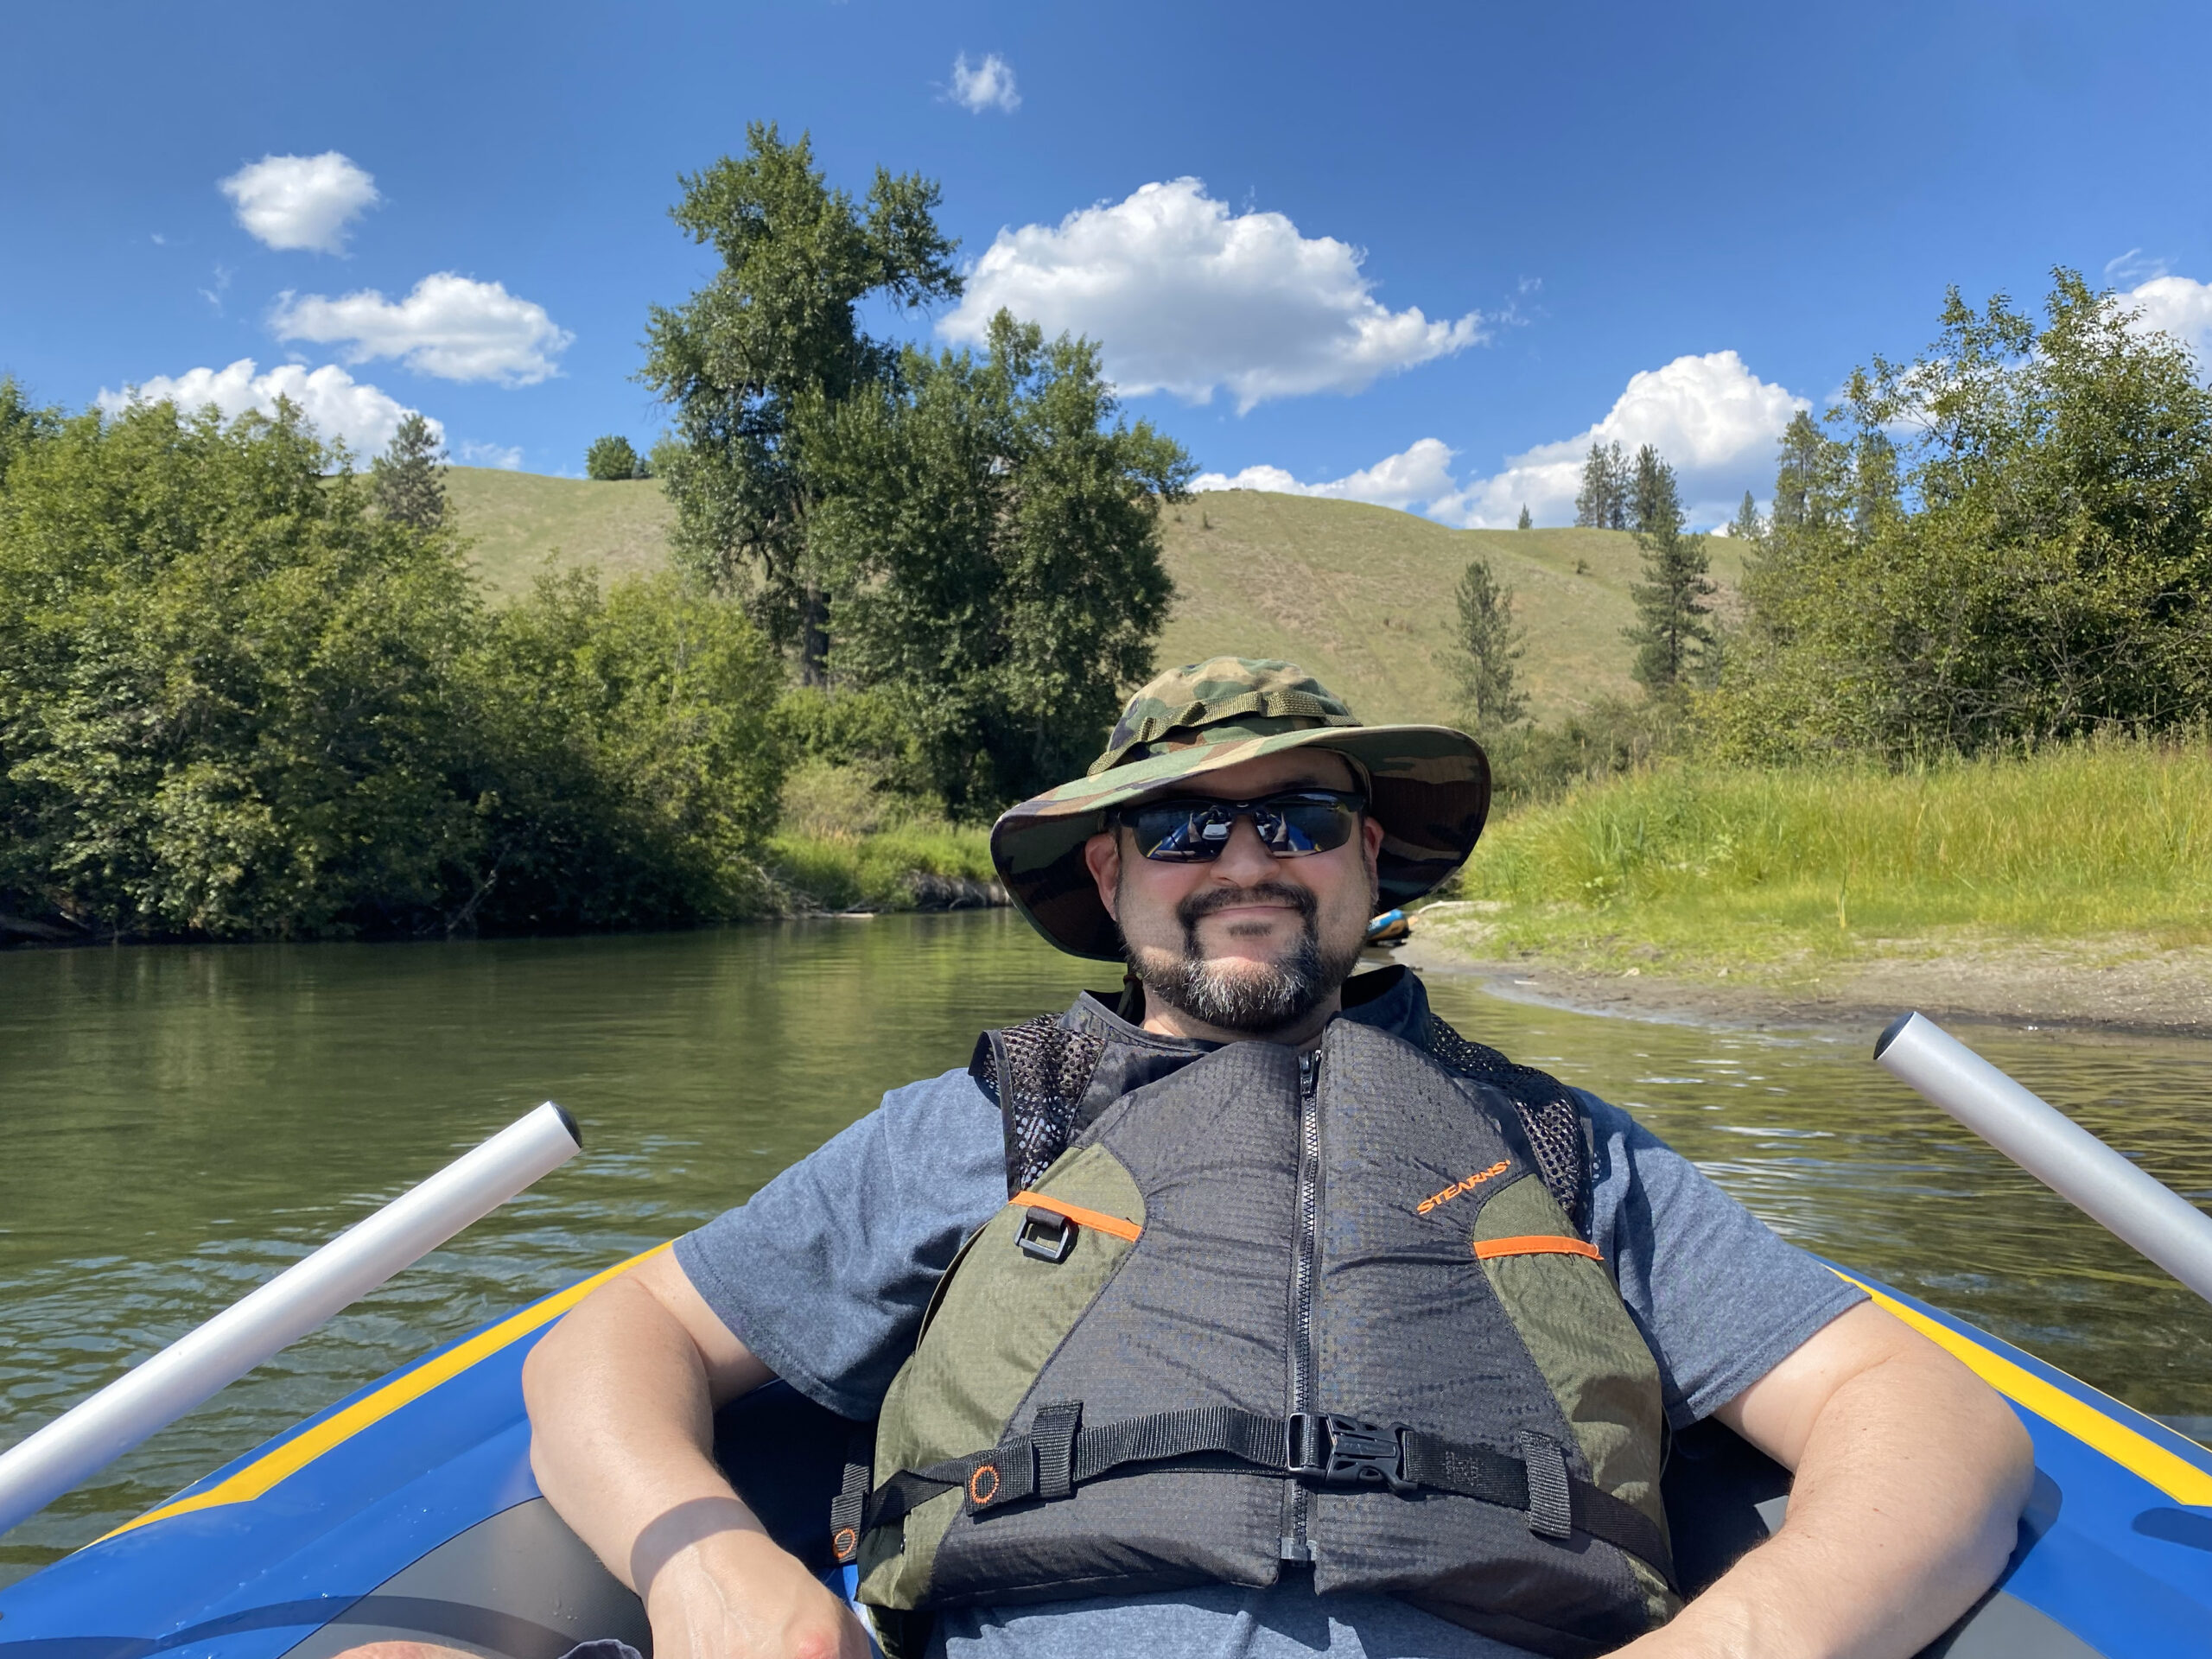 Erich Ebel smiling and reclining in an inflatable raft wearing a sun hat, sunglasses, and a life vest with the Little Spokane River and countryside in the background.